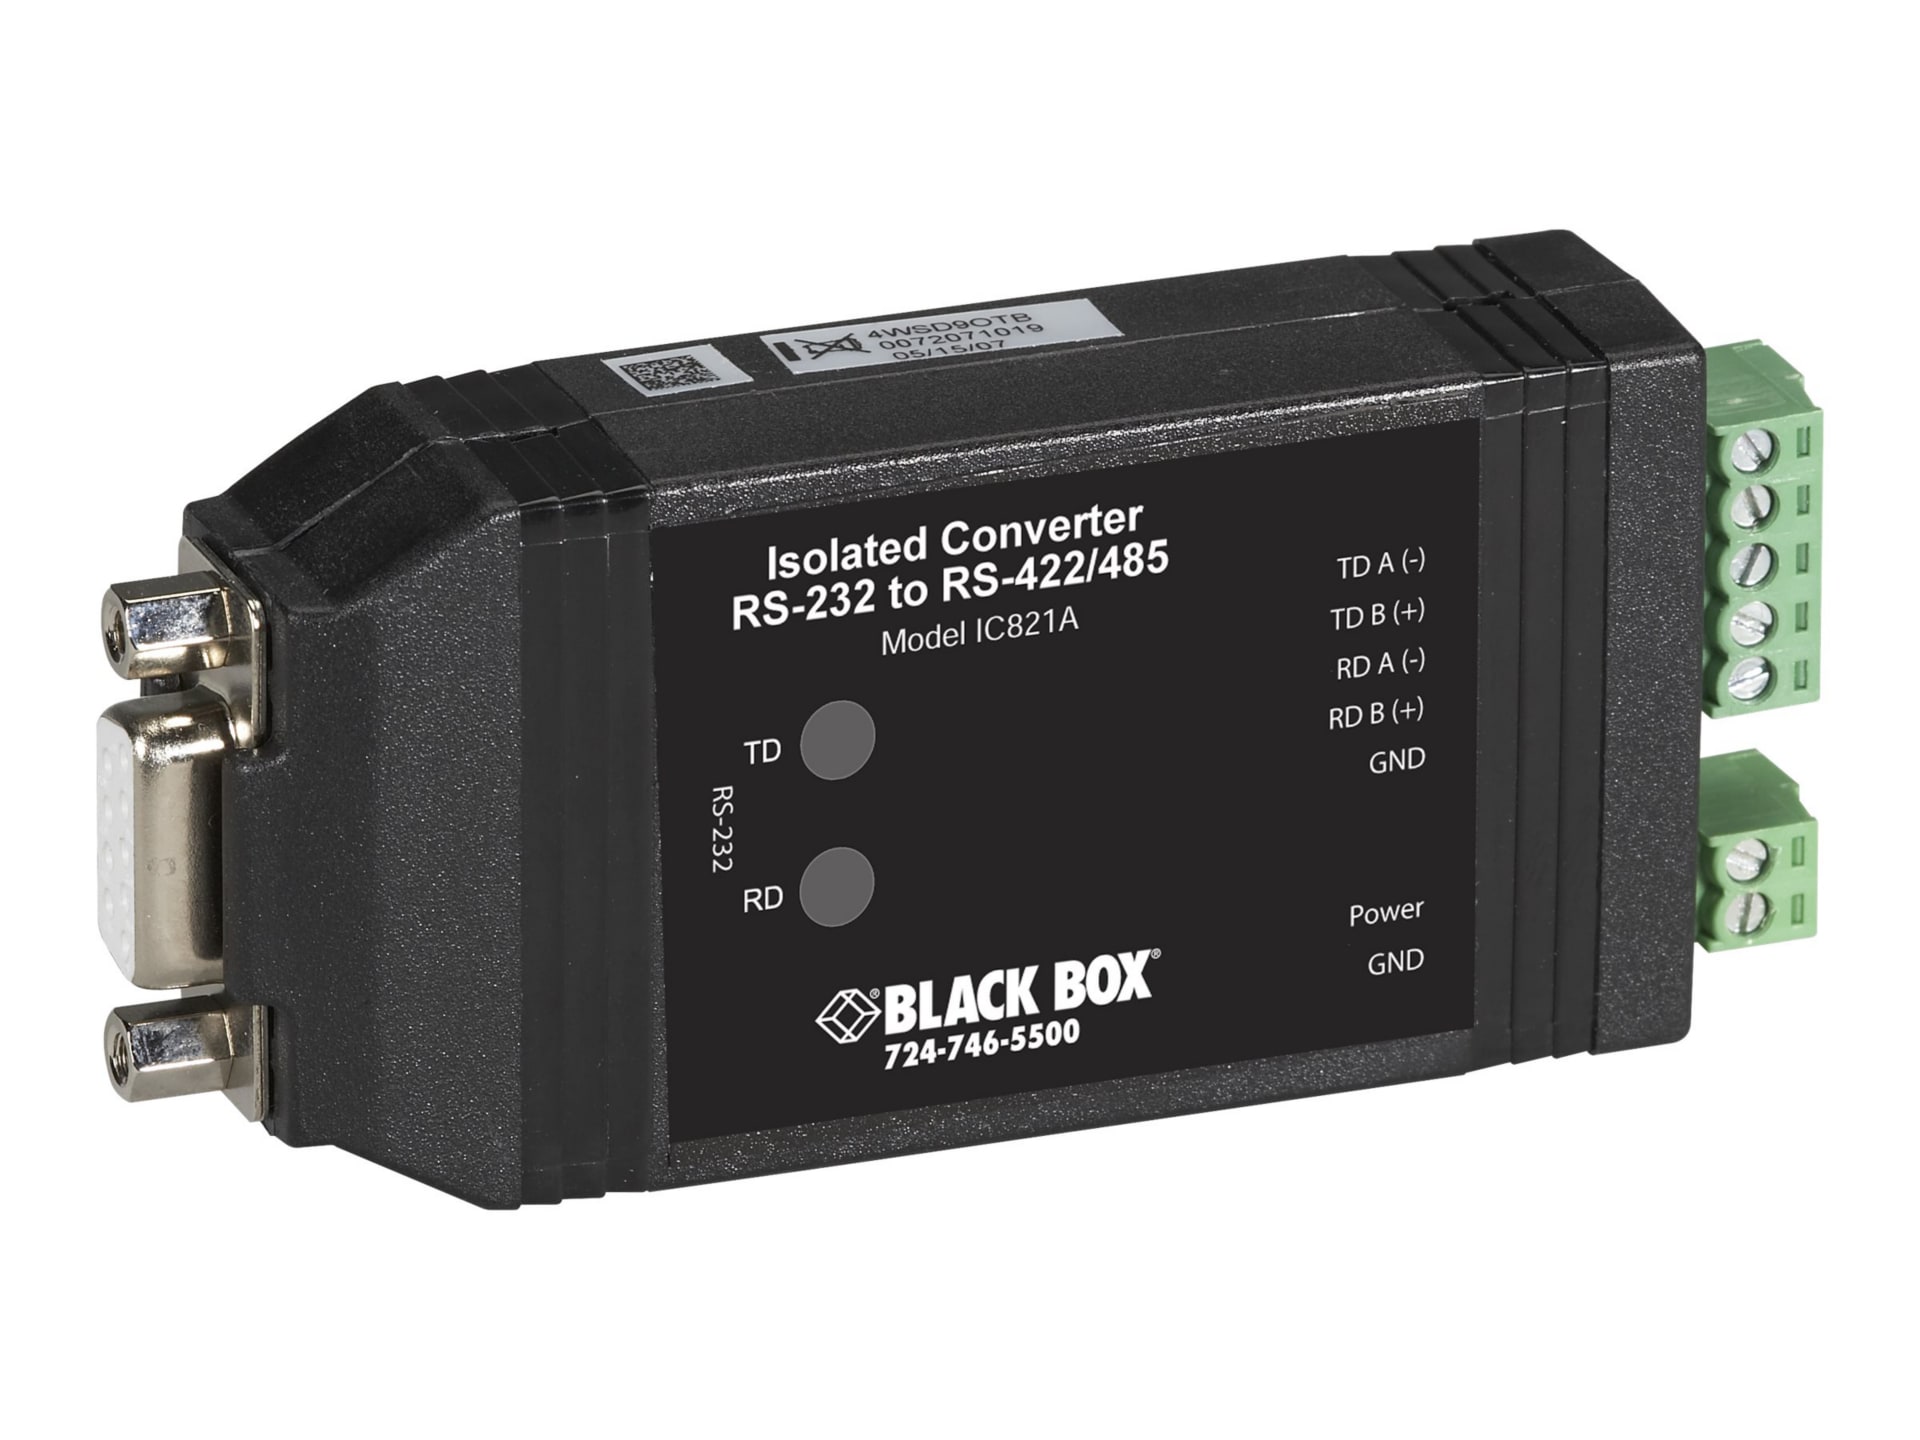 Black Box Universal RS-232RS-422/485 Converter with Opto-Isolation - ser